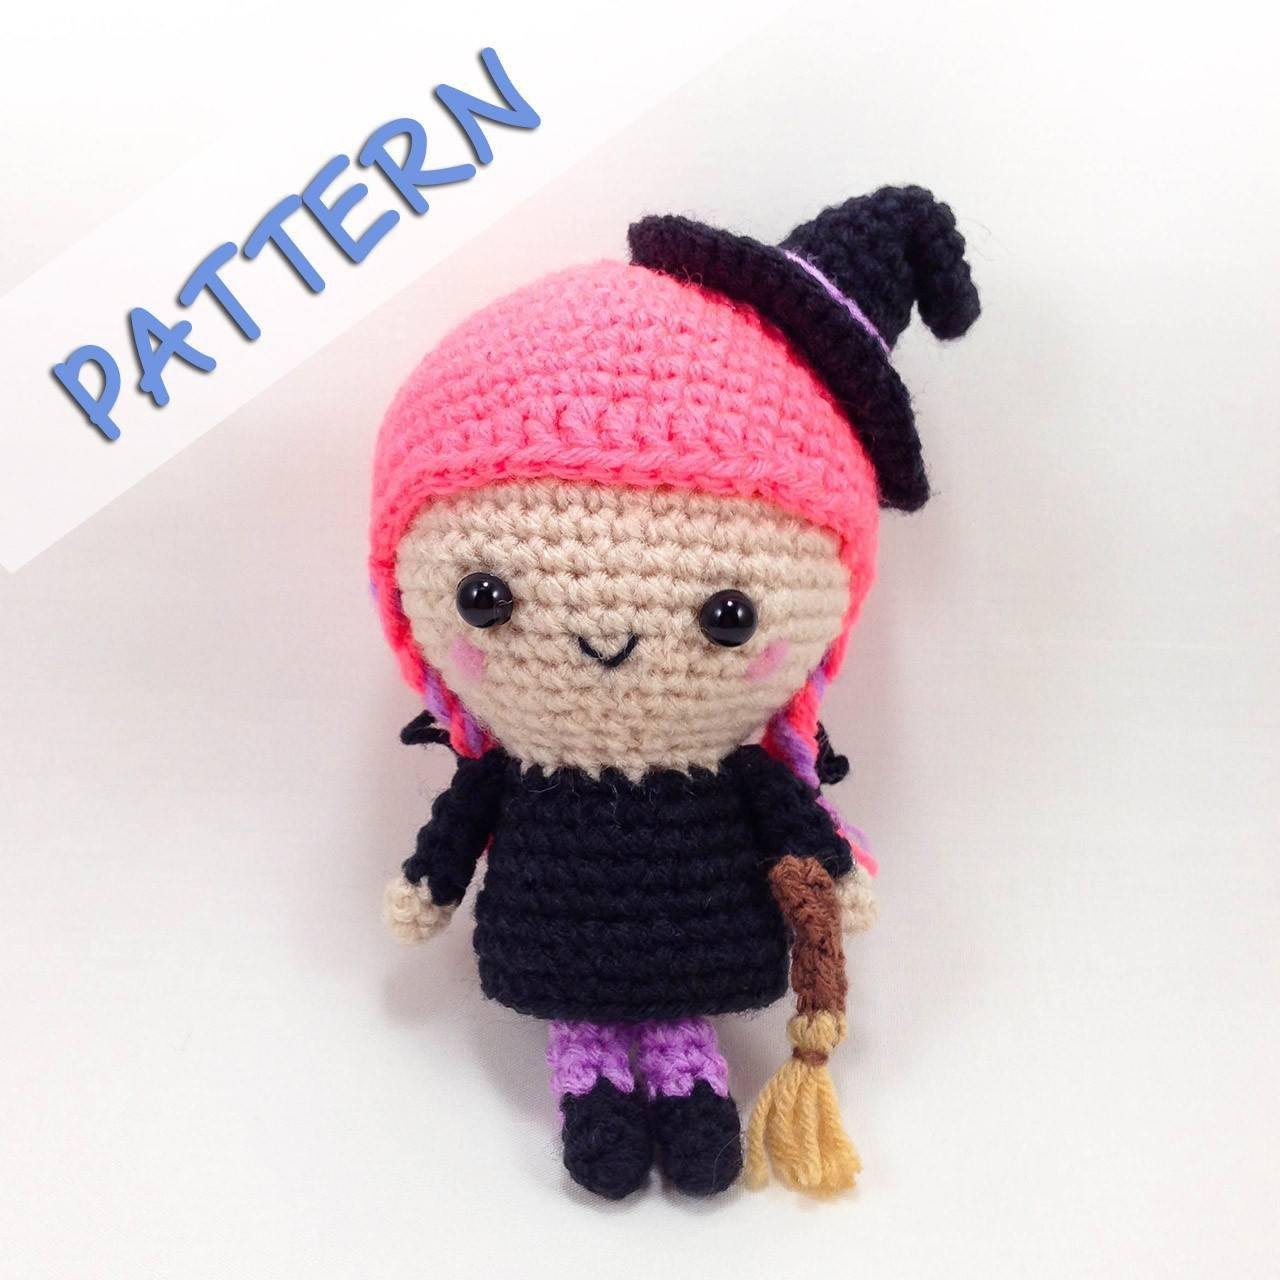 Flo the witch crochet pattern